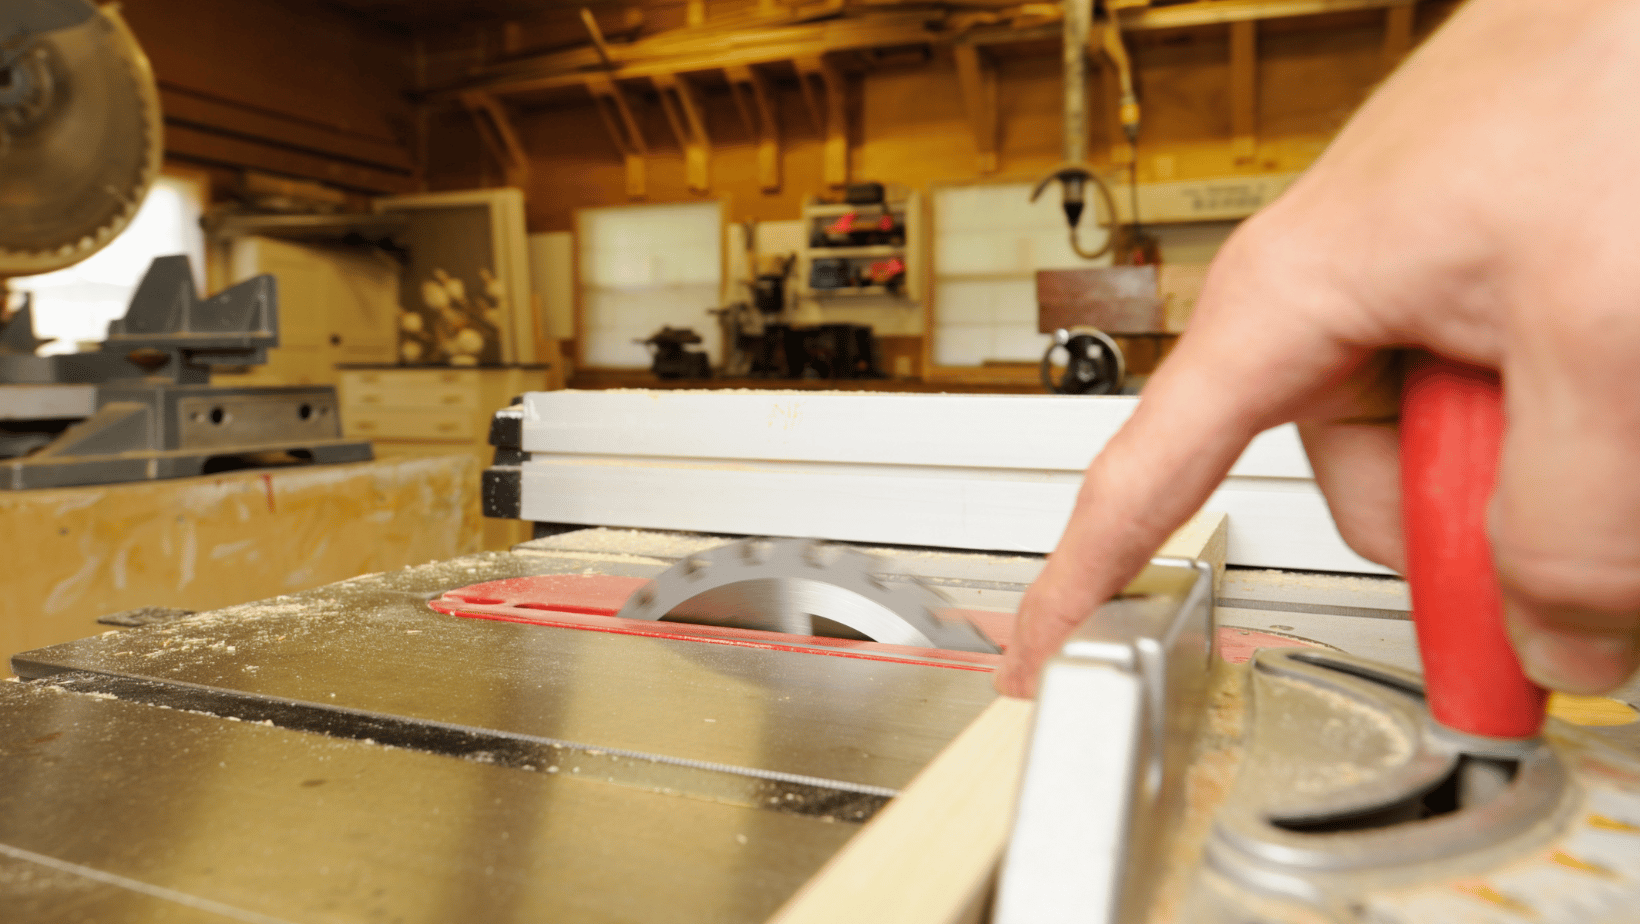 How To Make Jobsite Table Saw More Slippery?